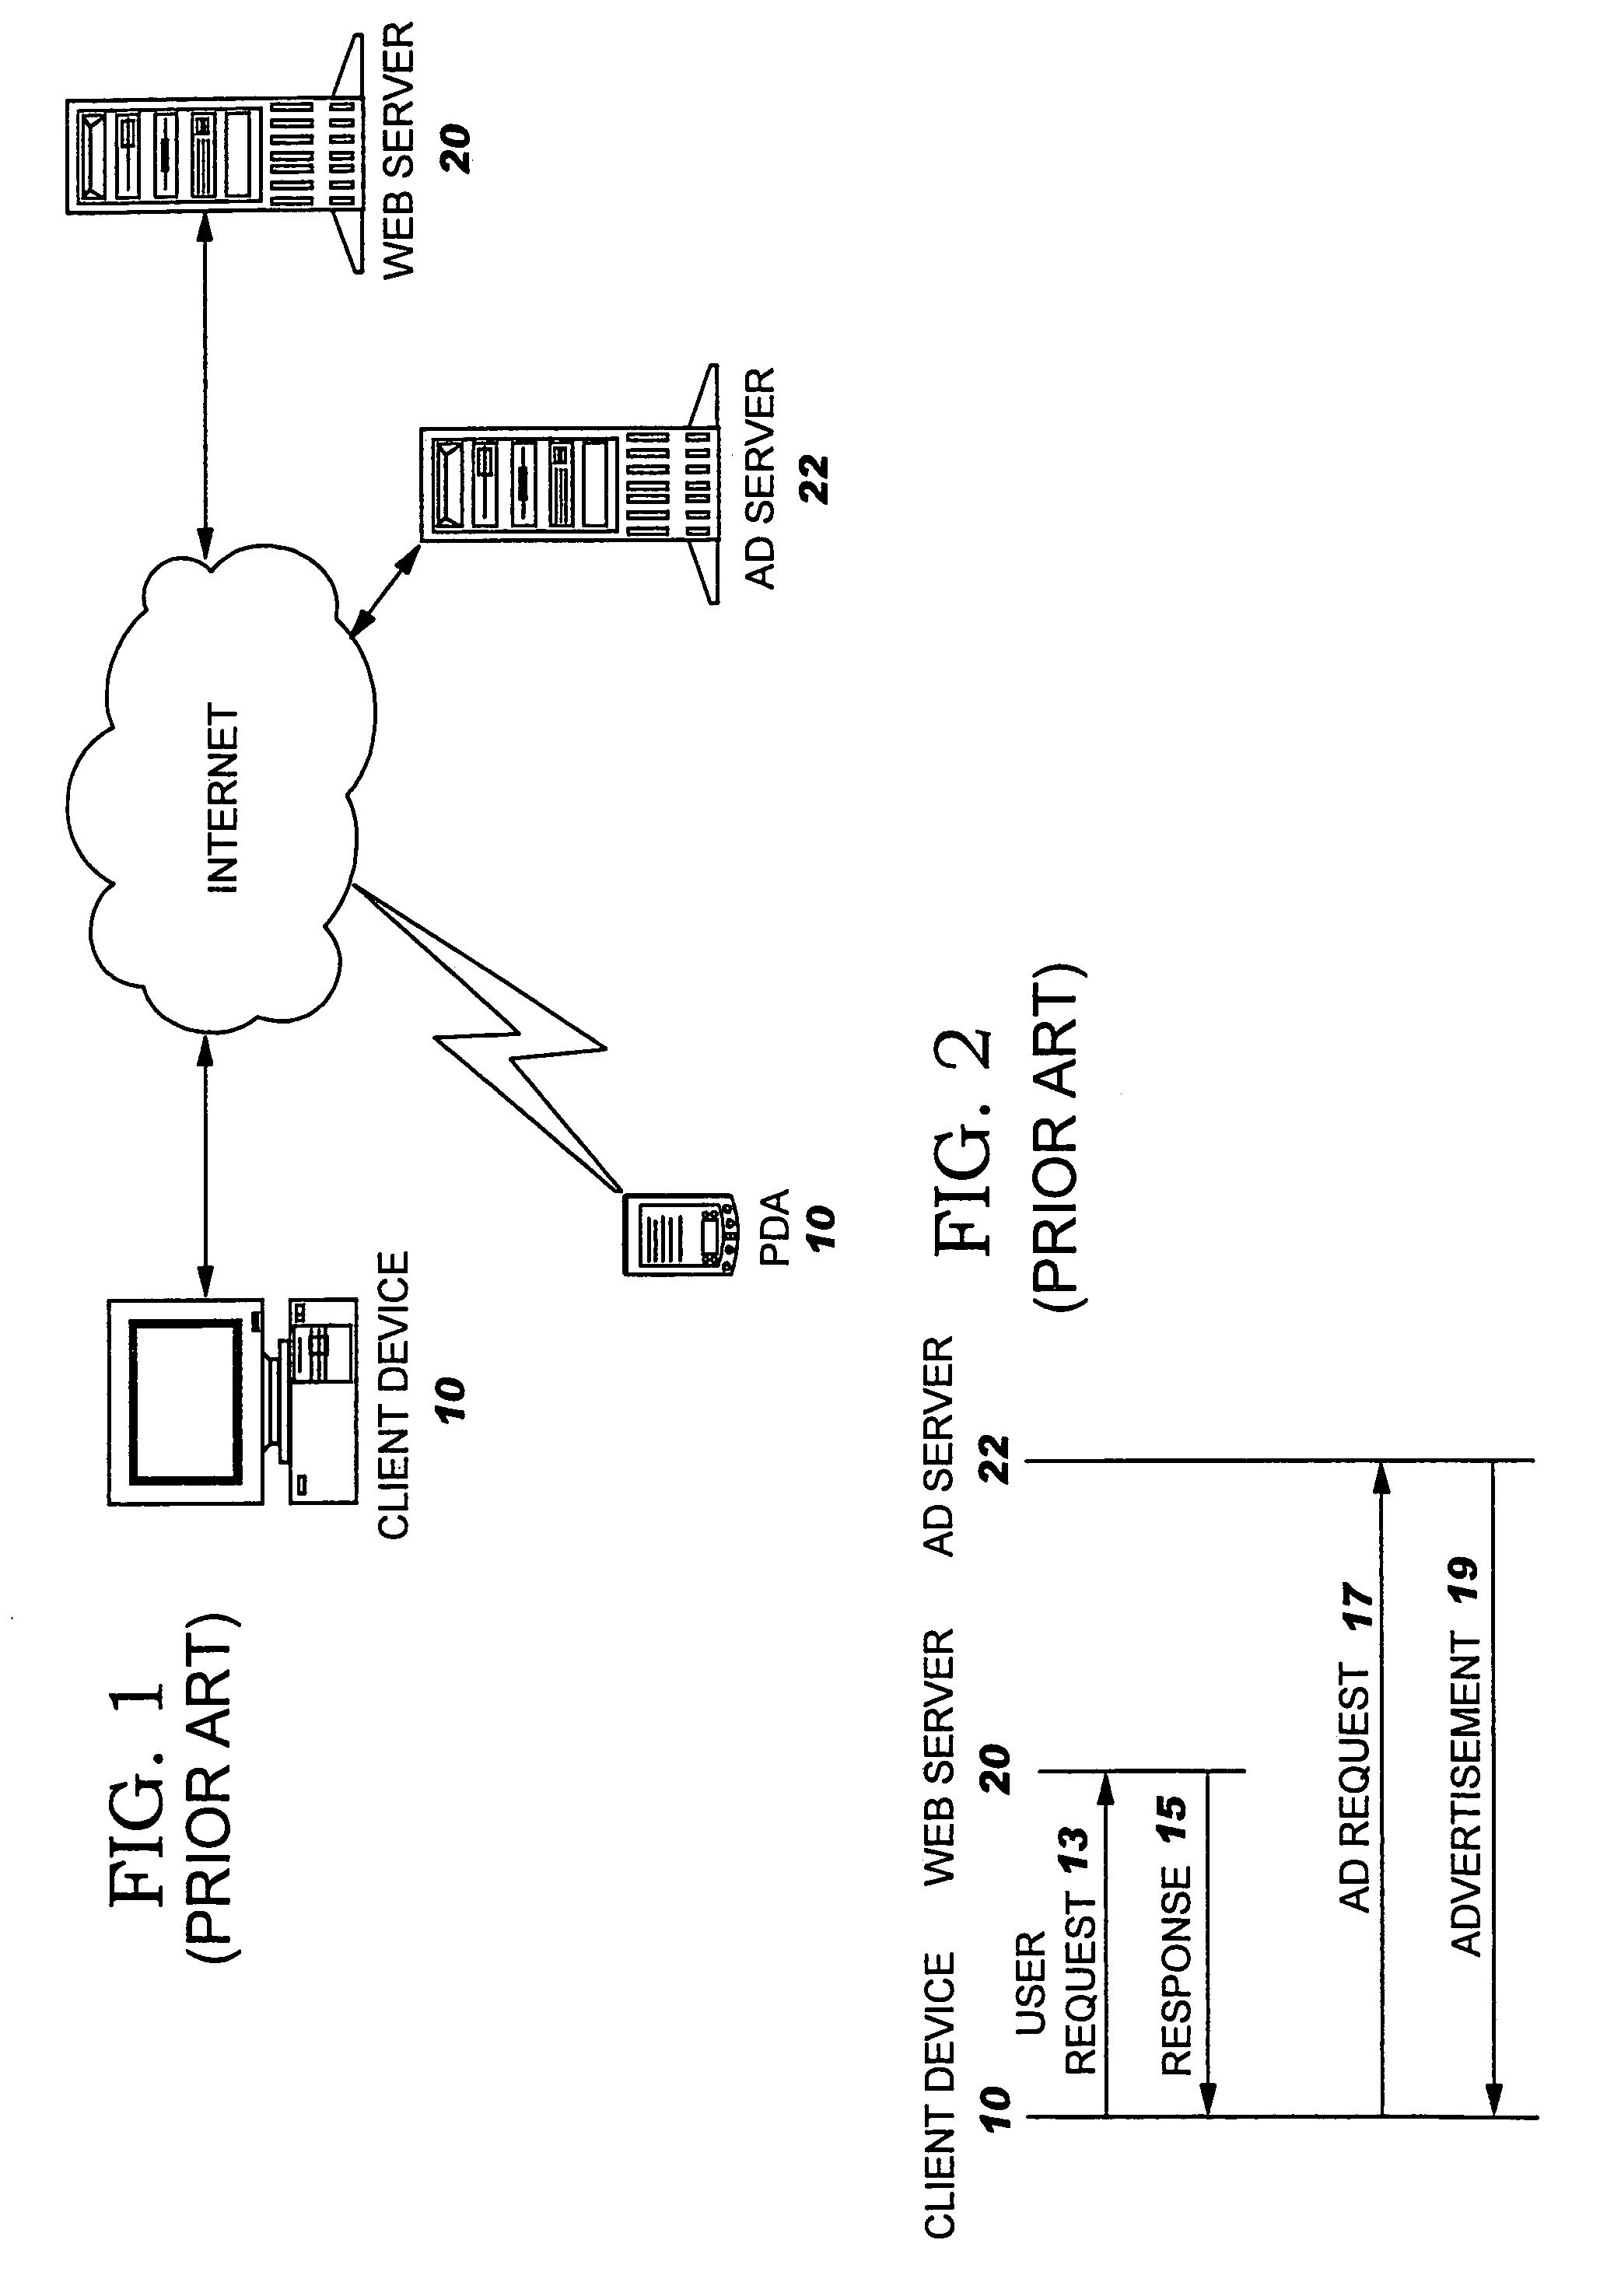 Systems, methods, and computer program products for registering wireless device users in direct marketing campaigns